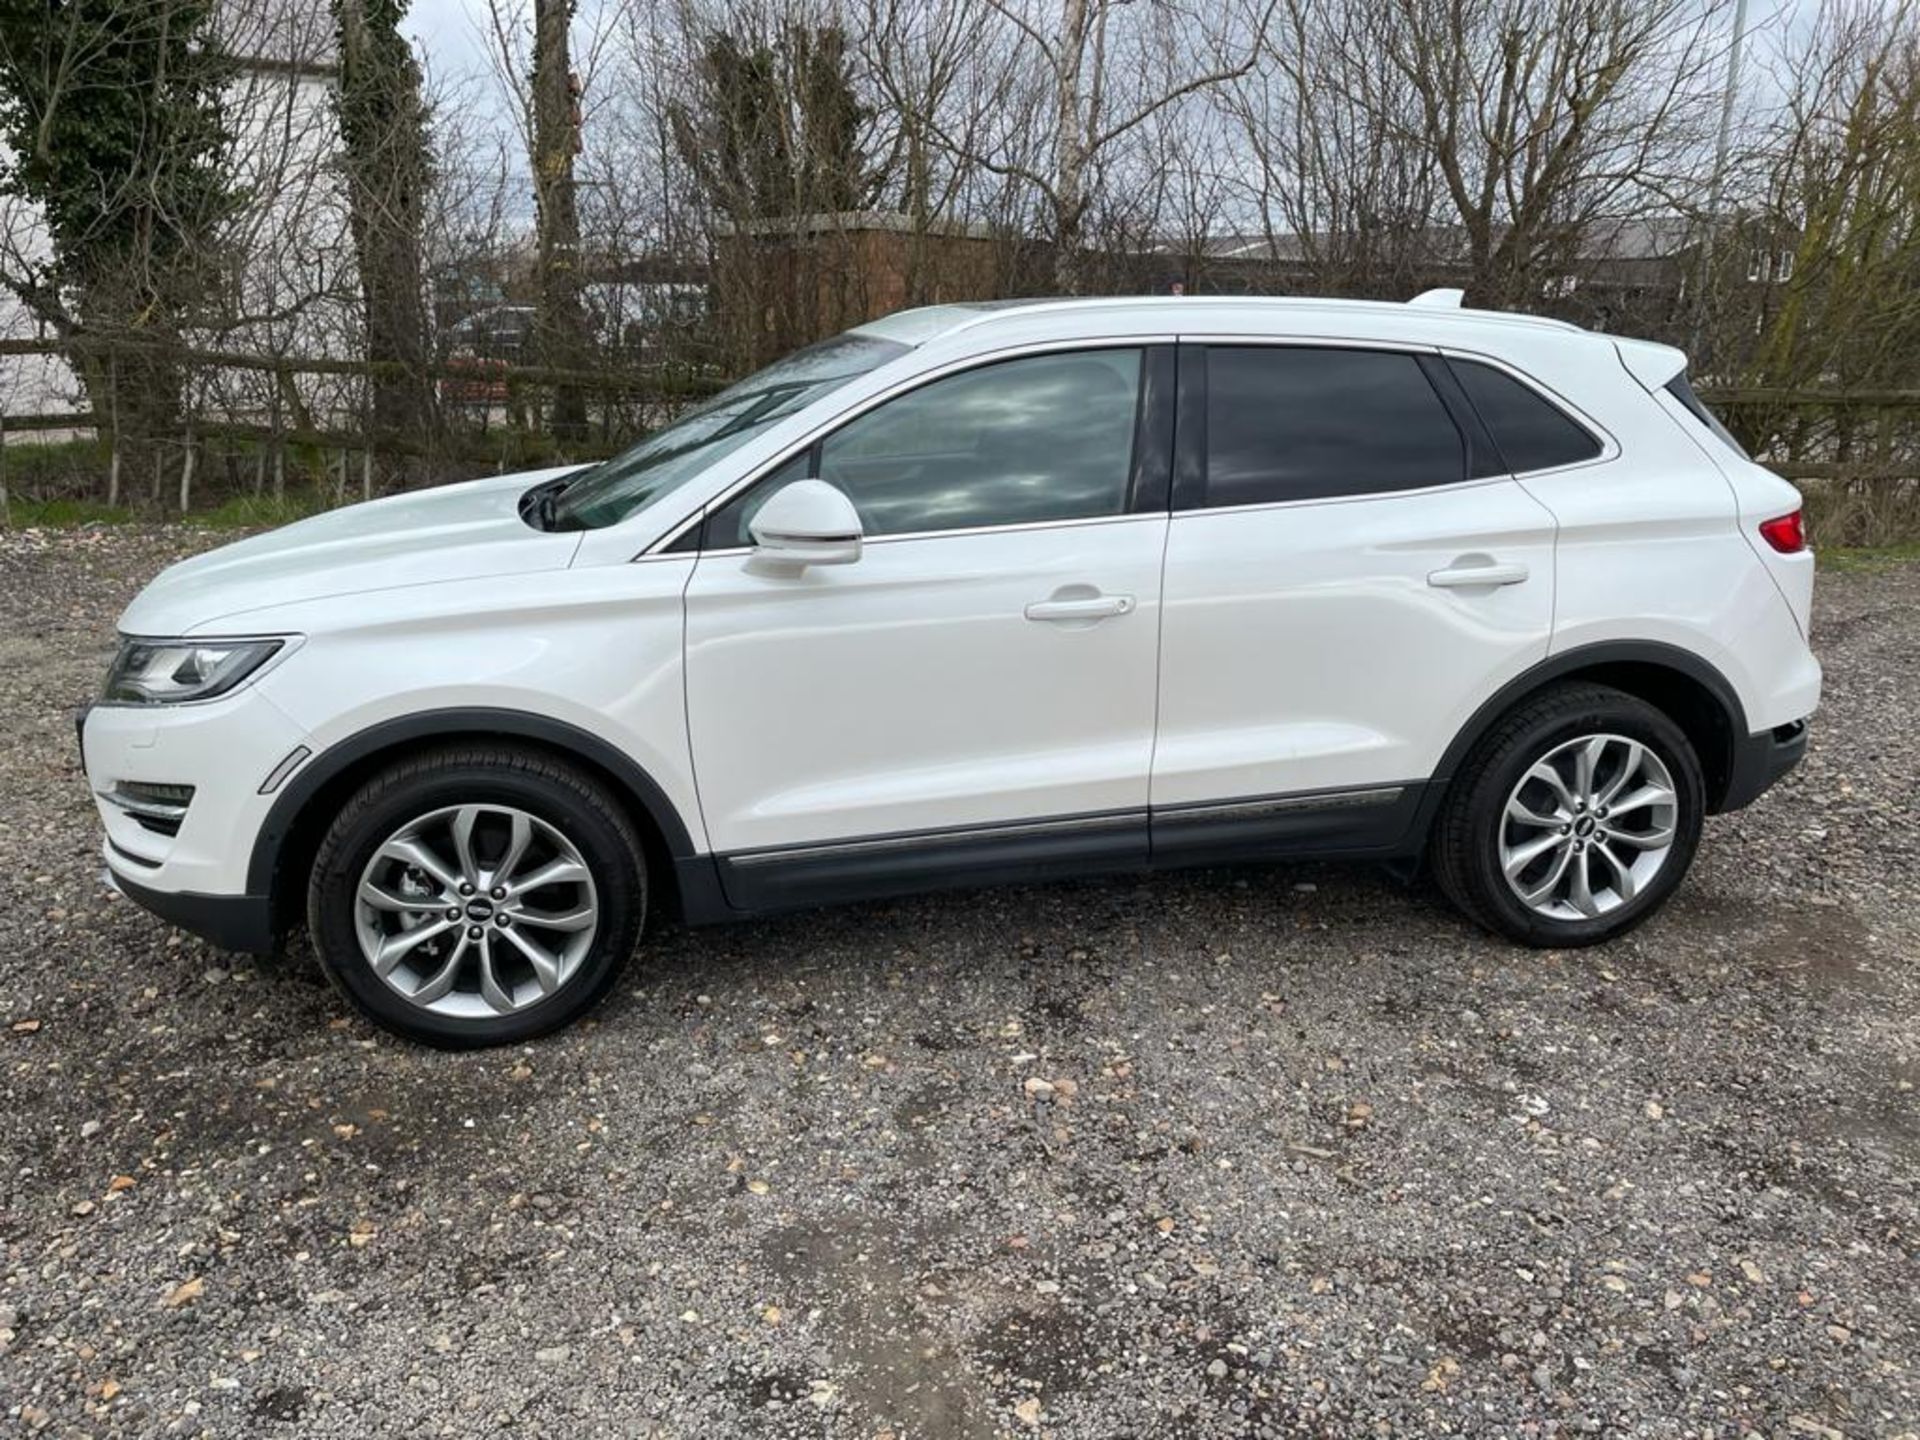 69 REG LINCOLN MKC RESERVE 2.0L ECOBOOST, 200bhp, PLATINUM WHITE WITH CAPPUCCINO LEATHER INTERIOR - Image 3 of 13